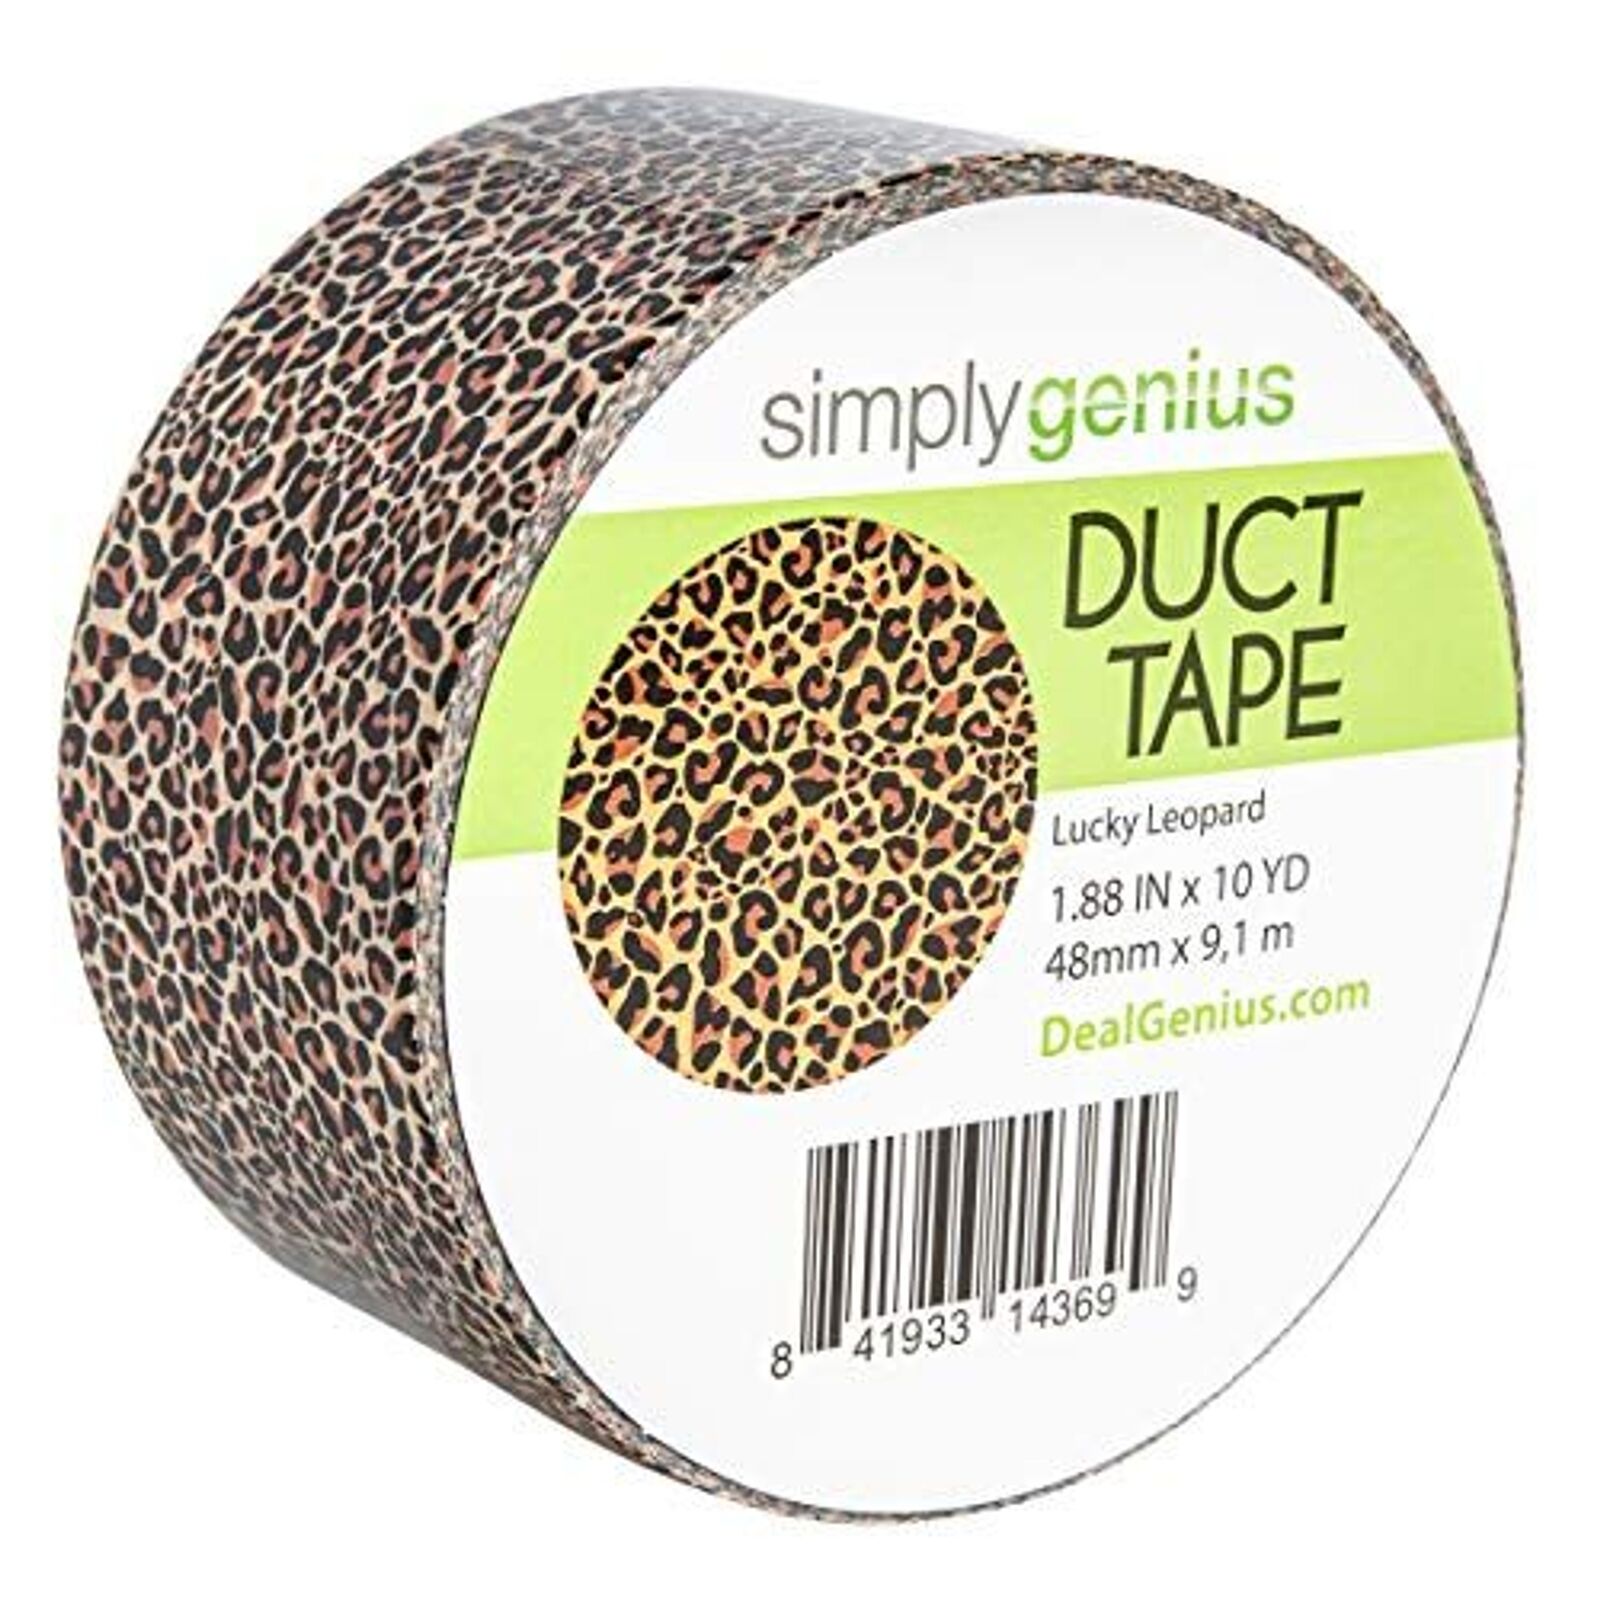 Pattern Duct Tape Heavy Duty, Craft Supplies, 1.8 in x 10 yards (Lucky Leopard)